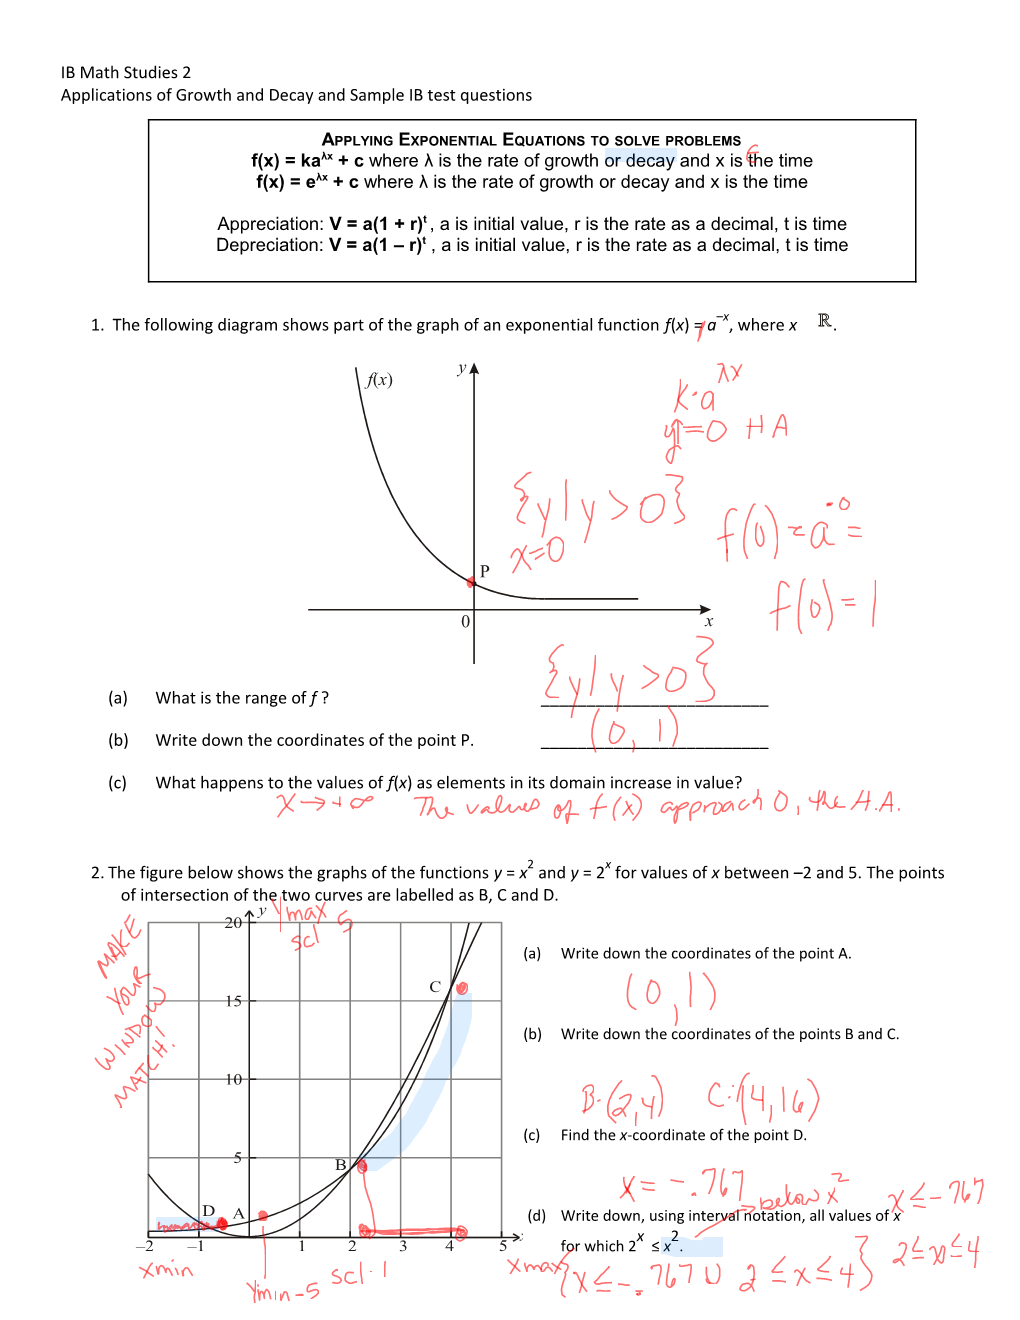 Applications of Growth and Decay and Sample IB Test Questions